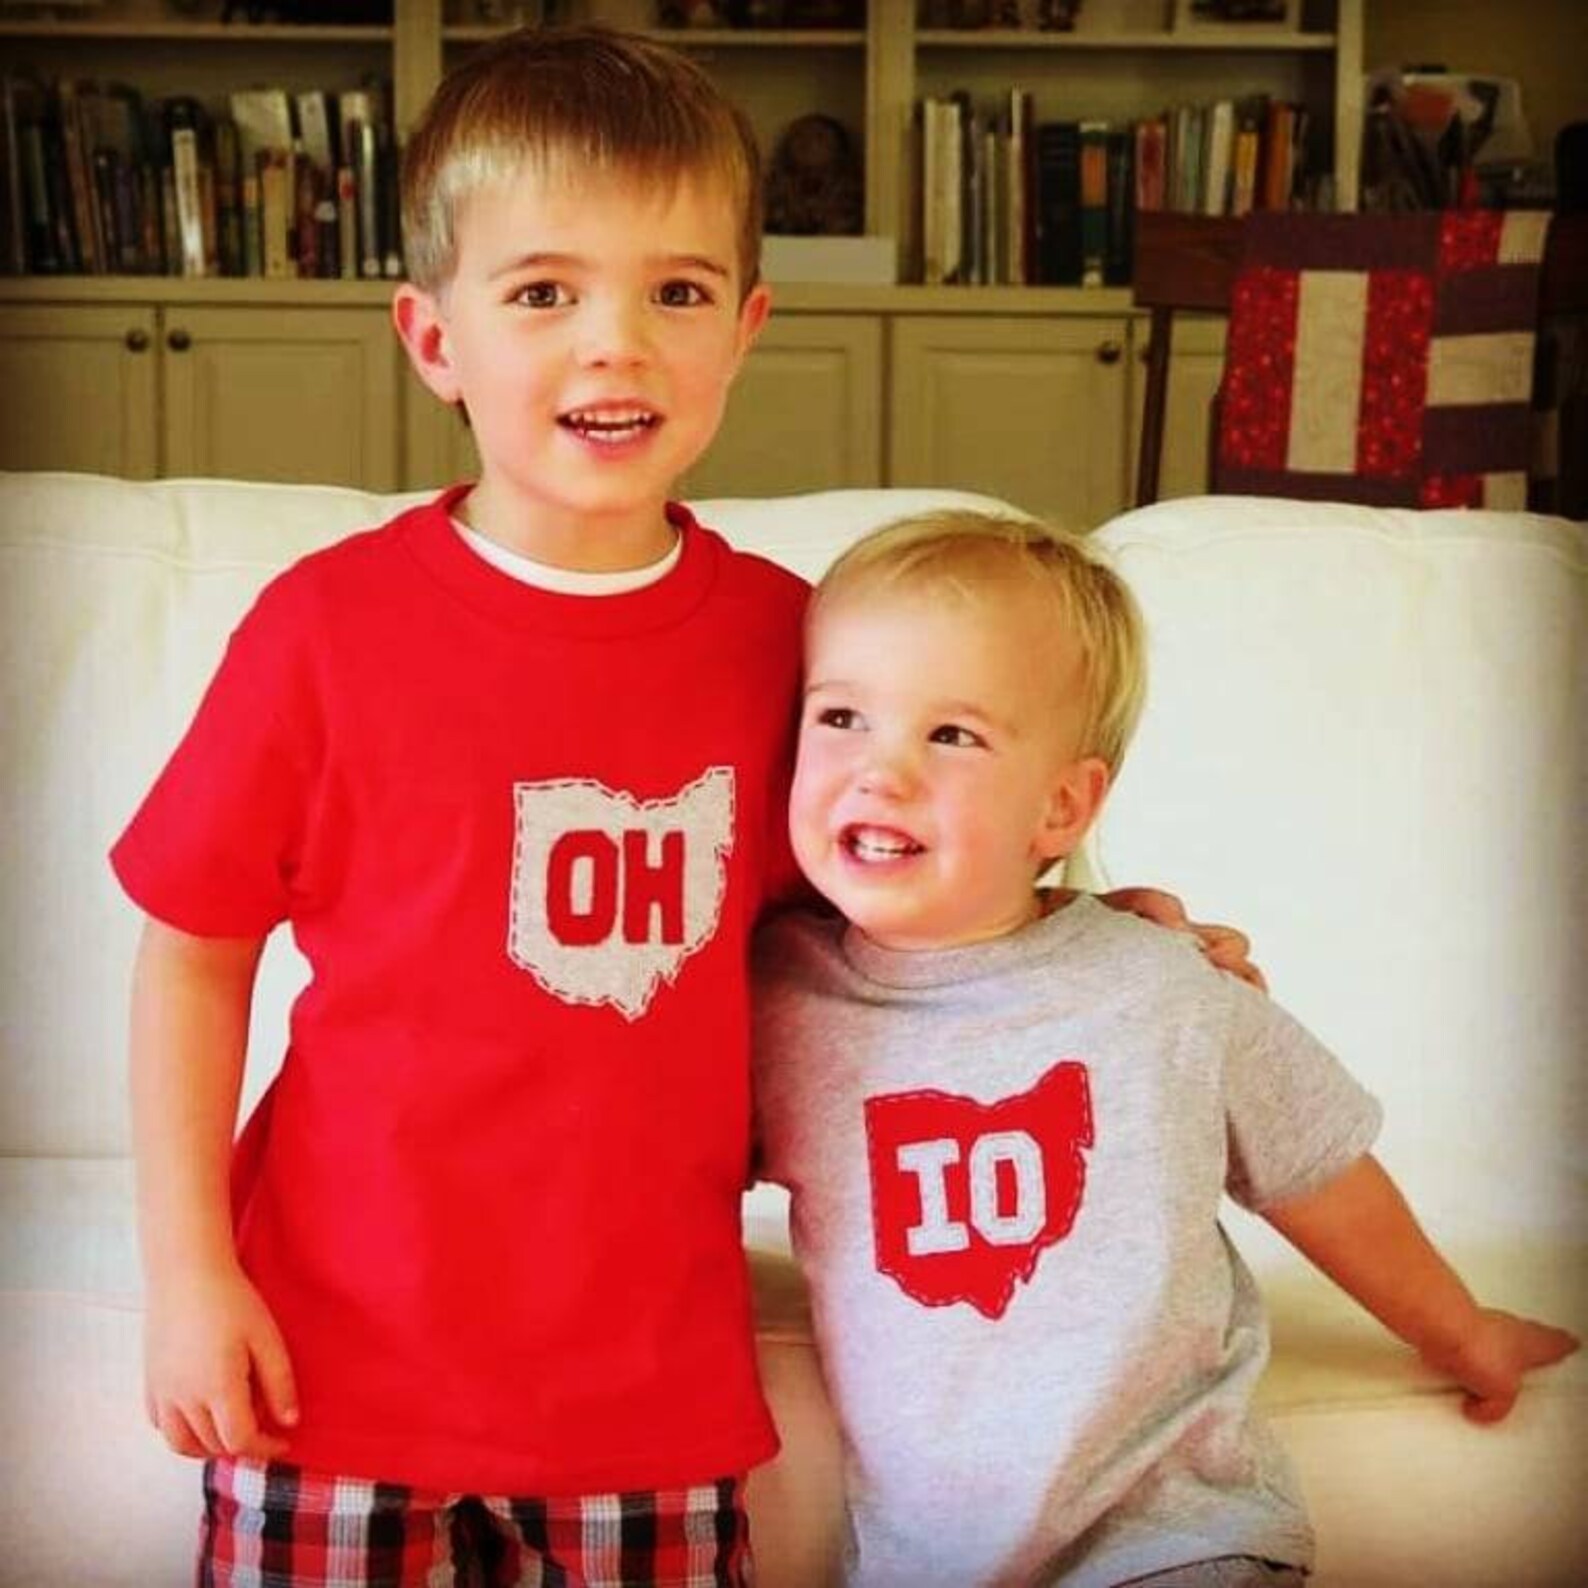 OH-IO Bodysuit/t-shirt Set for SIBLINGS Great Way to | Etsy